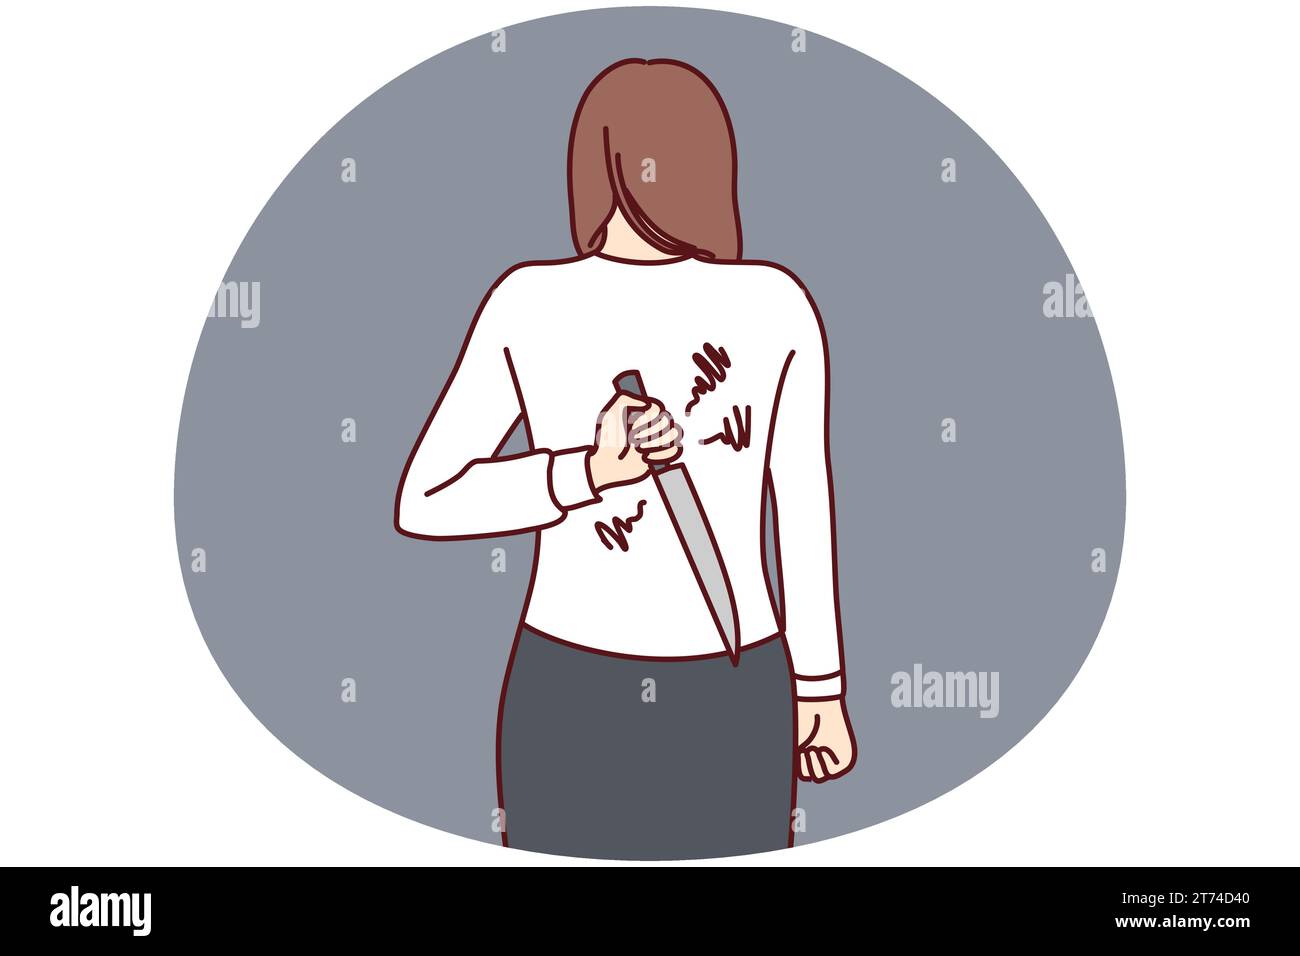 Woman hiding knife behind back ready to betray or attack. Businesswoman with weapon hidden. Risky deal or rivalry. Vector illustration. Stock Vector